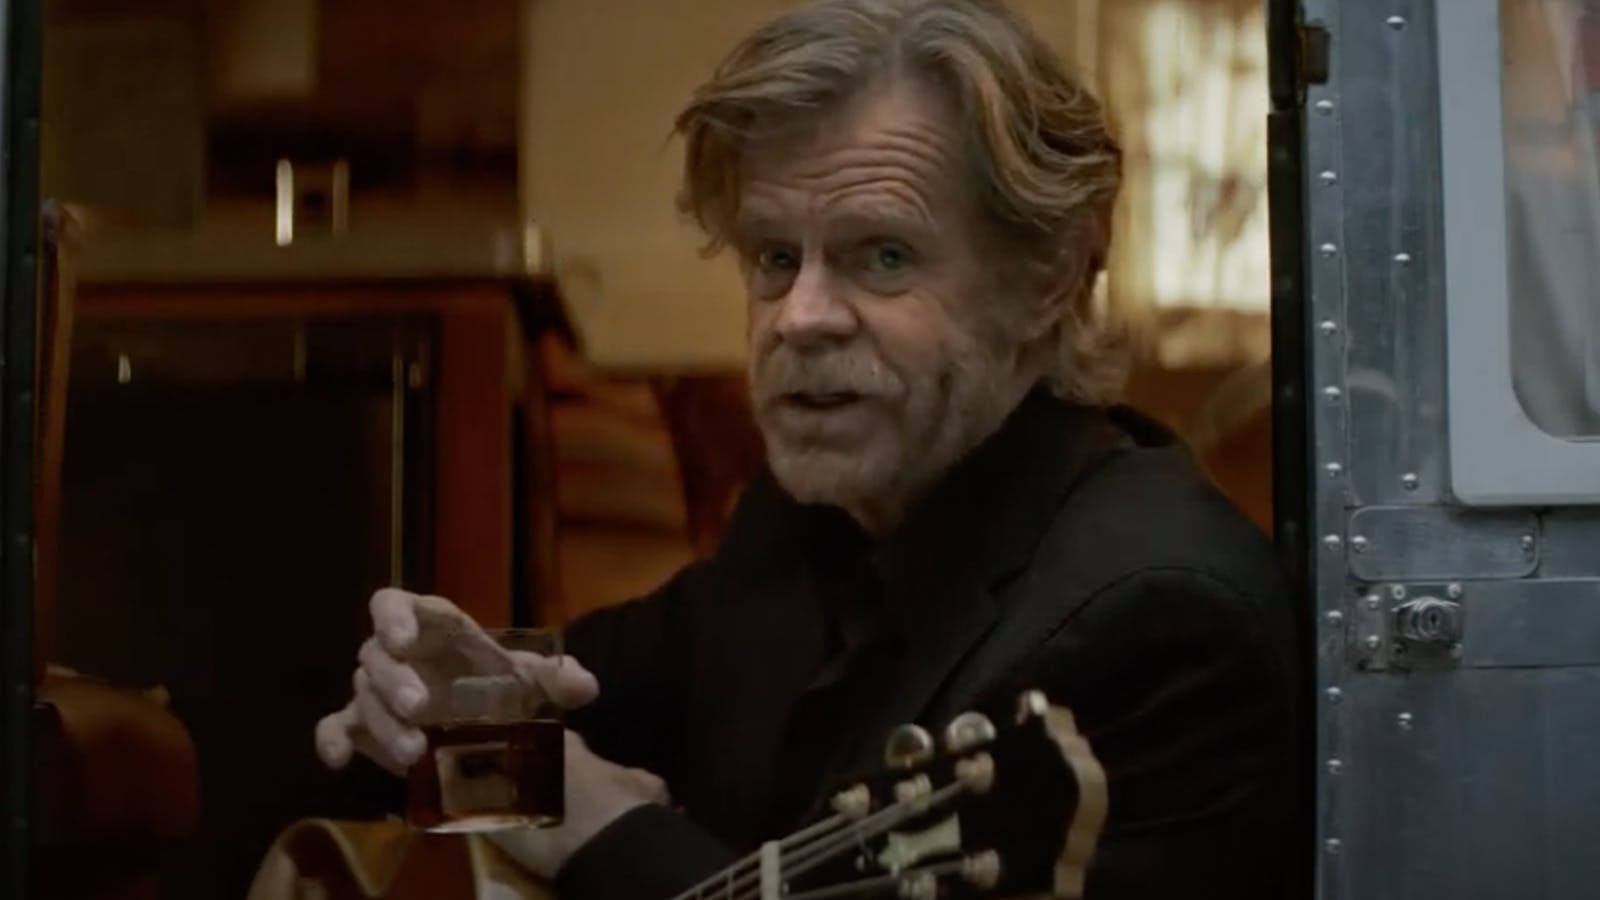 Screen grab of actor William H. Macy looking at the camera and raising a glass of bourbon for the Woody Creek campaign.